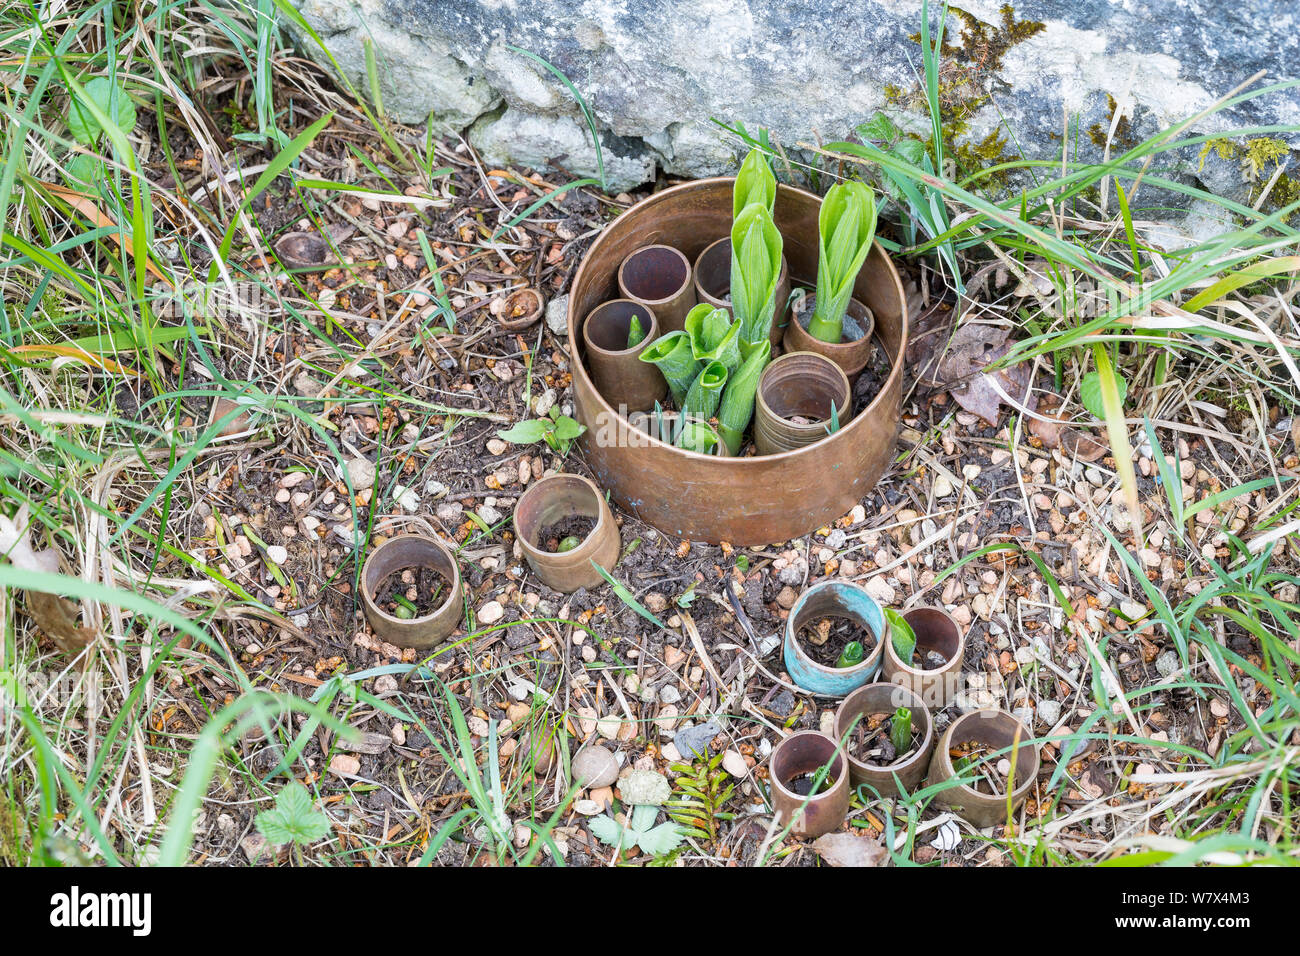 Young Lady&#39;s Slipper orchid plants (Cypripedium calceolus)  protected by plastic rings, Lancashire, UK. April. Stock Photo